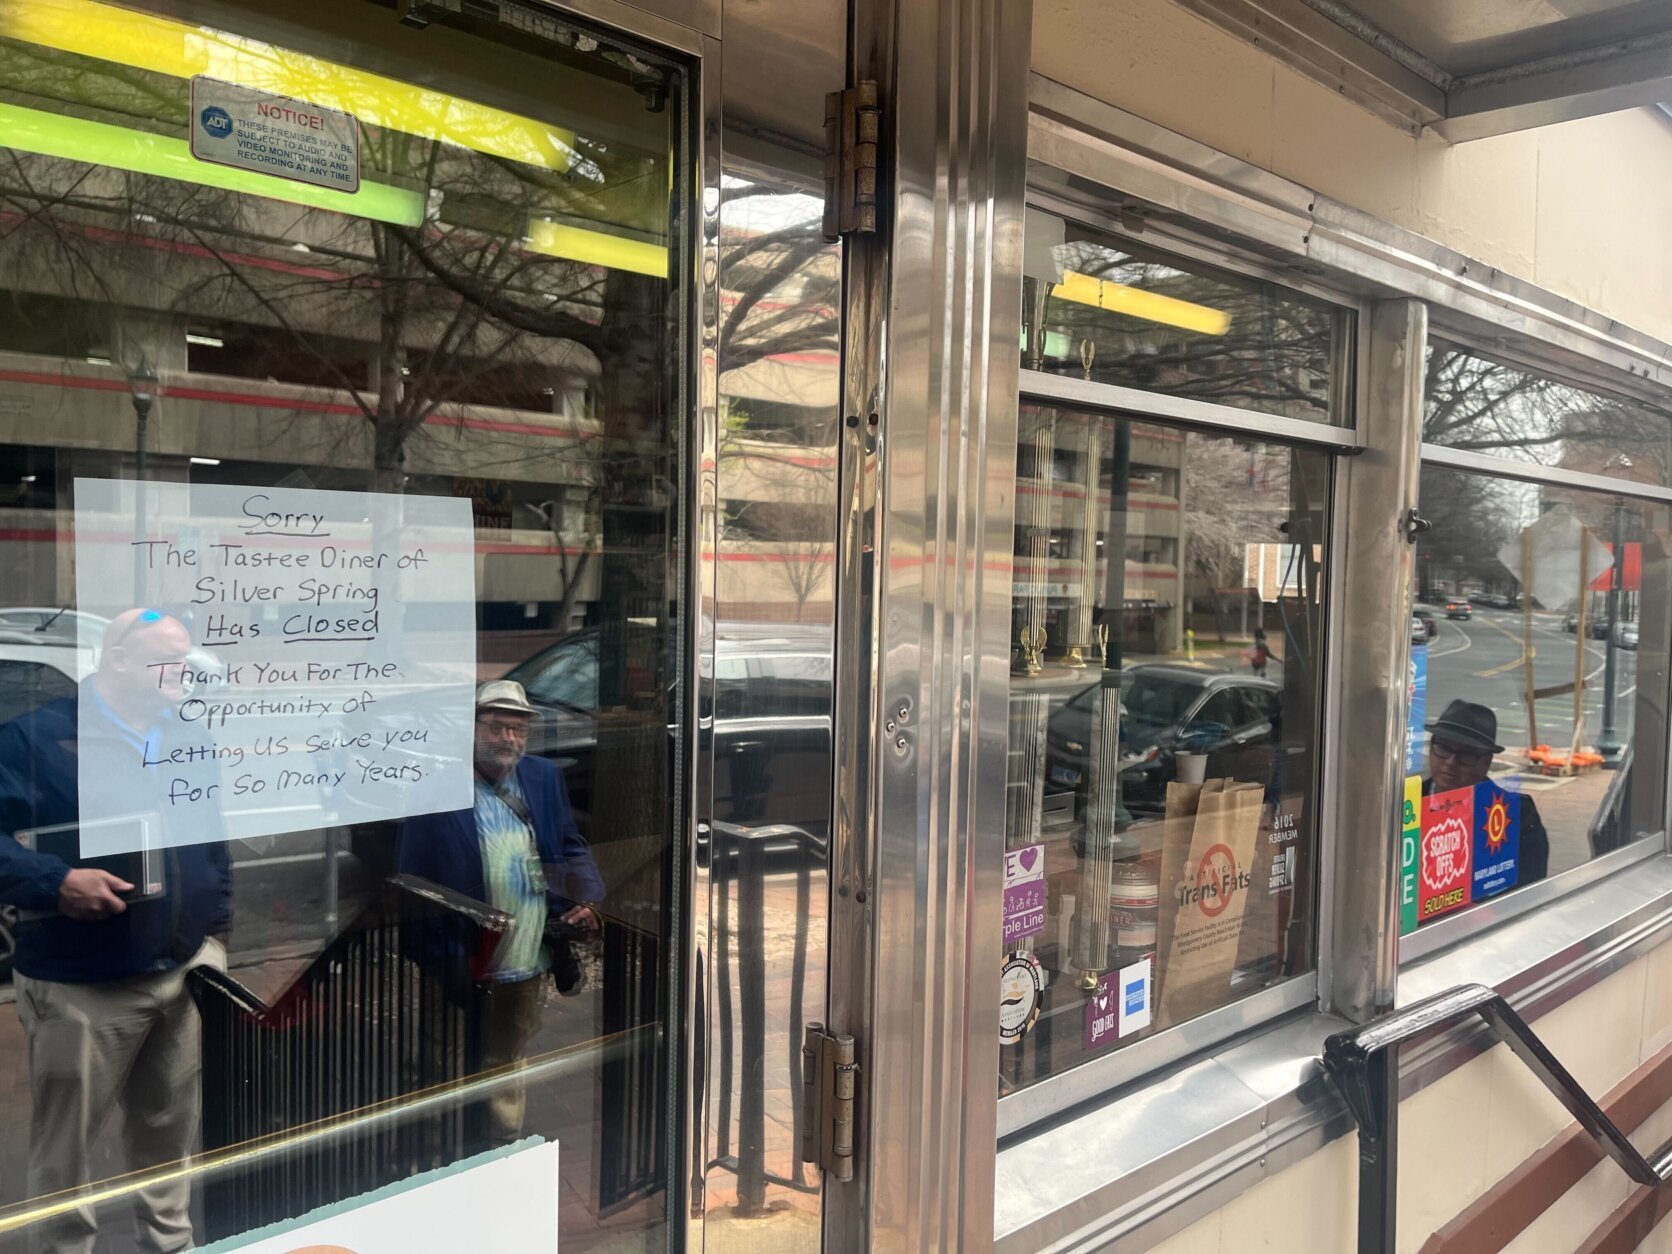 <p>The iconic Tastee Diner in Silver Spring, Maryland, abruptly closed Wednesday, with shocked customers lining up outside, seeing a note on the front door that only said, &#8220;Thank you for the opportunity of letting us serve you for so many years.&#8221;</p>
